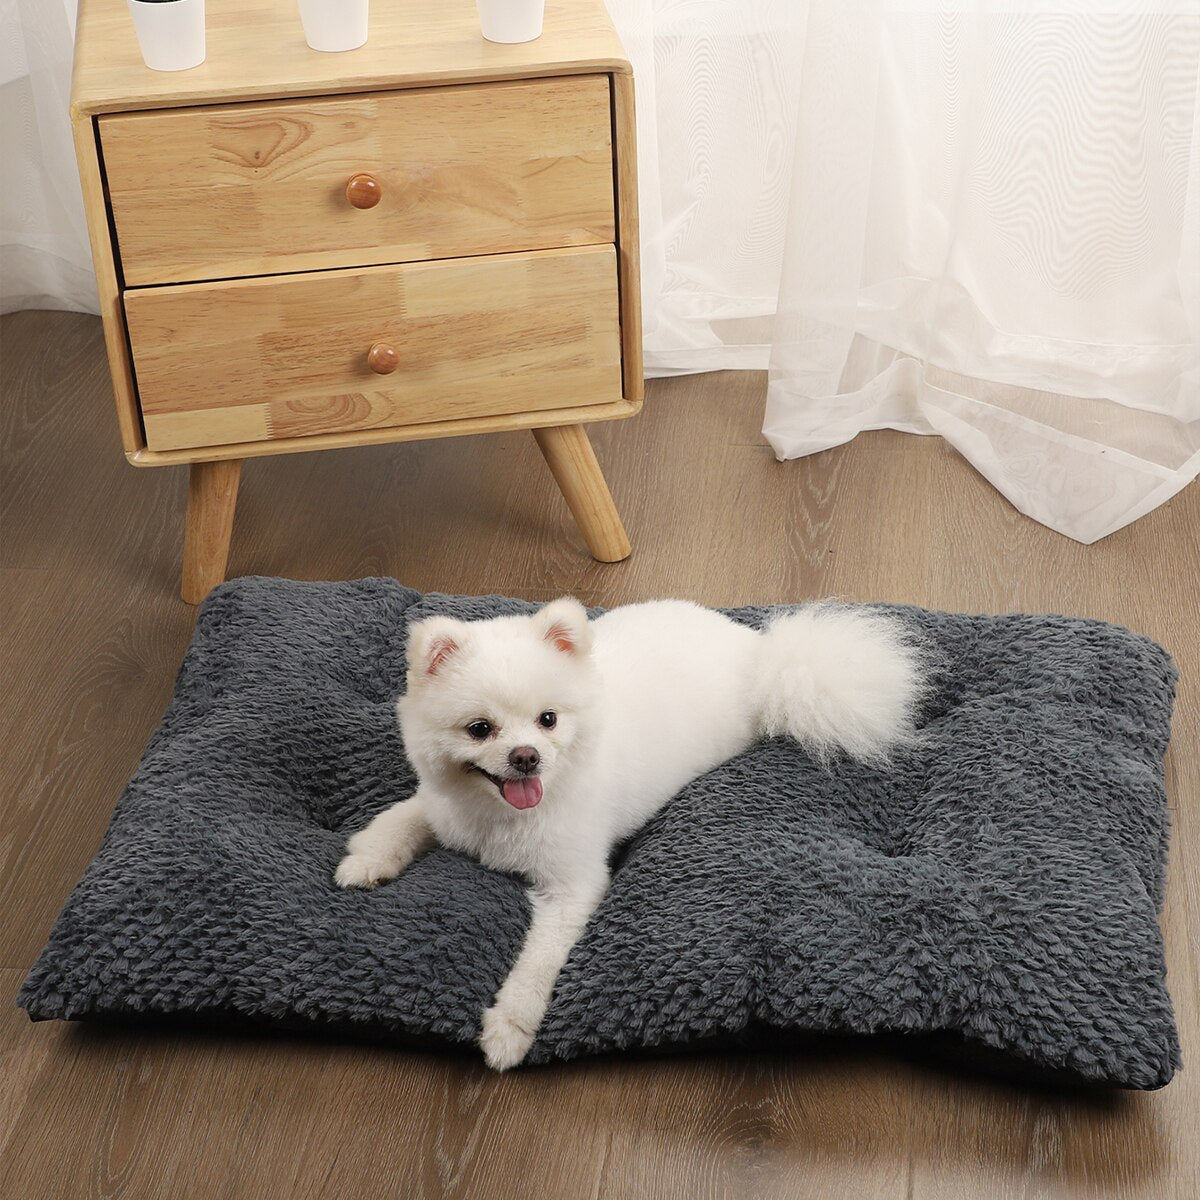 Dog Mat Pet Bed Kennel Beds for Dogs Small Supplies Large Plush Washable Medium Basket Warm Accessories Accessory Fluffy Sofa